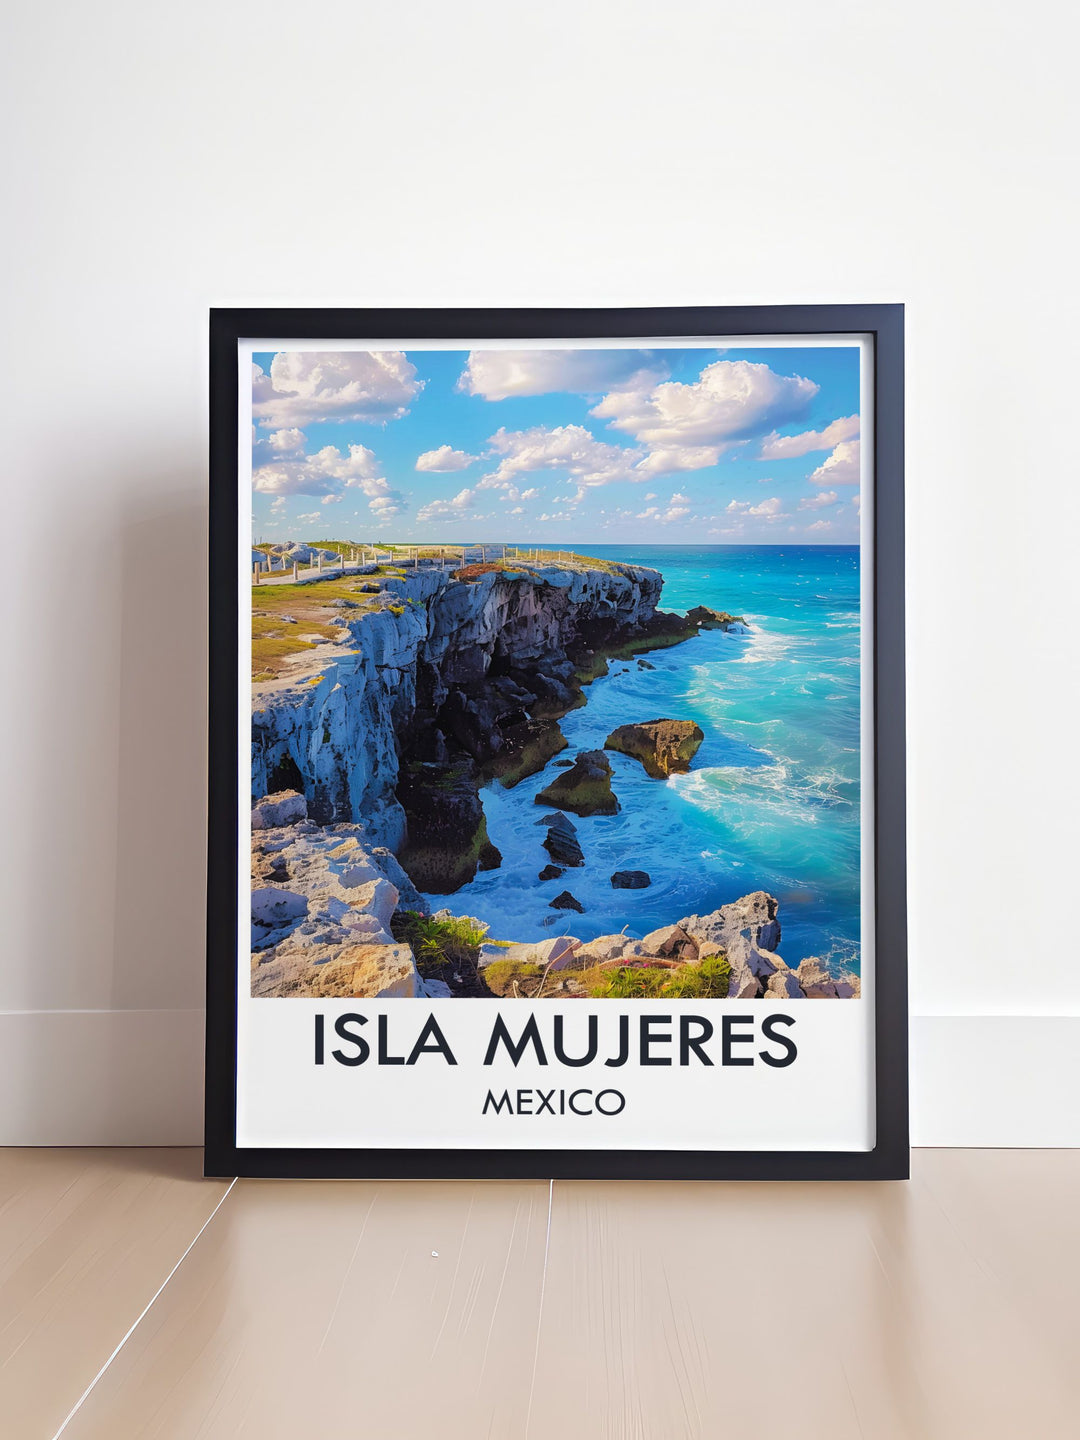 Fine art print of Isla Mujeres, showcasing its serene beaches and vibrant marine life, ideal for adding a touch of tropical elegance to your home decor.